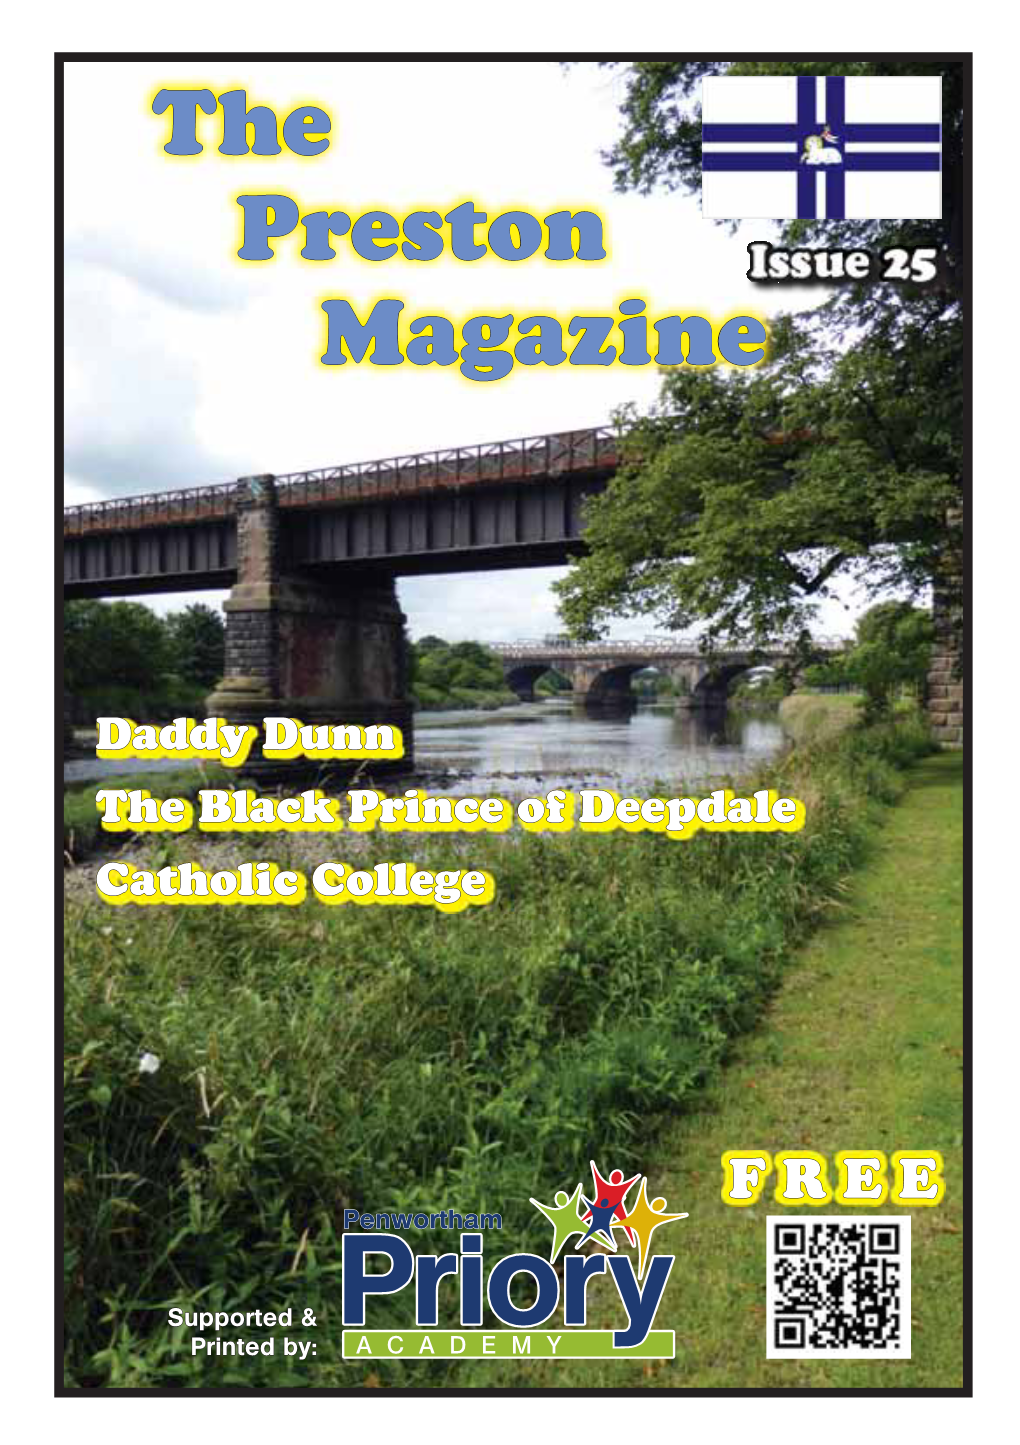 The Preston Magazine, Our Free Monthly Magazine Containing Snippets of Lesser-Known History Articles Relating to Preston